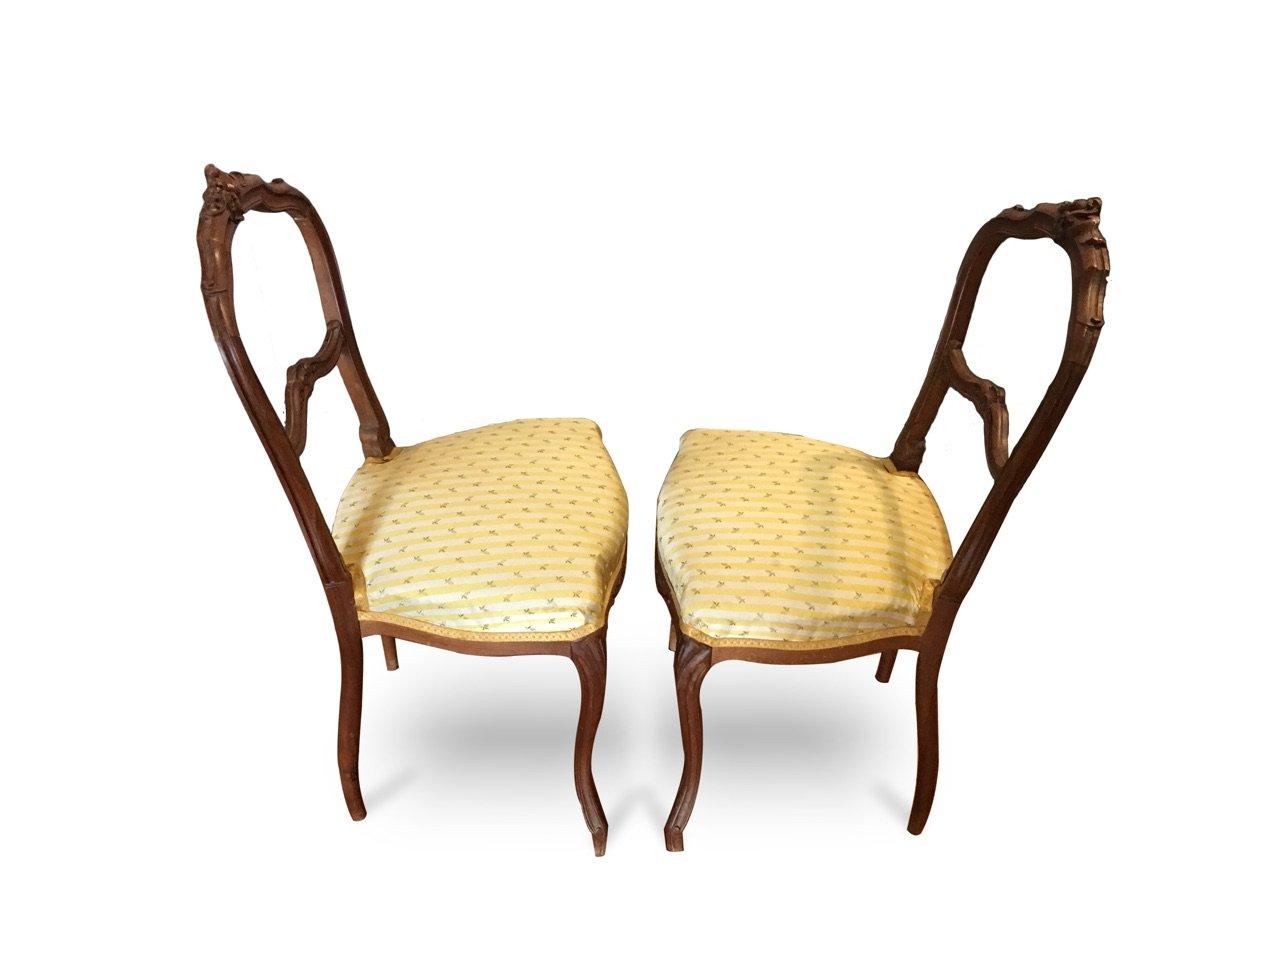 Early 19th century pair of small side chairs. Built in 19th century French period. Refine carved oakwood. Frame in good condition. Wear consistent with age.